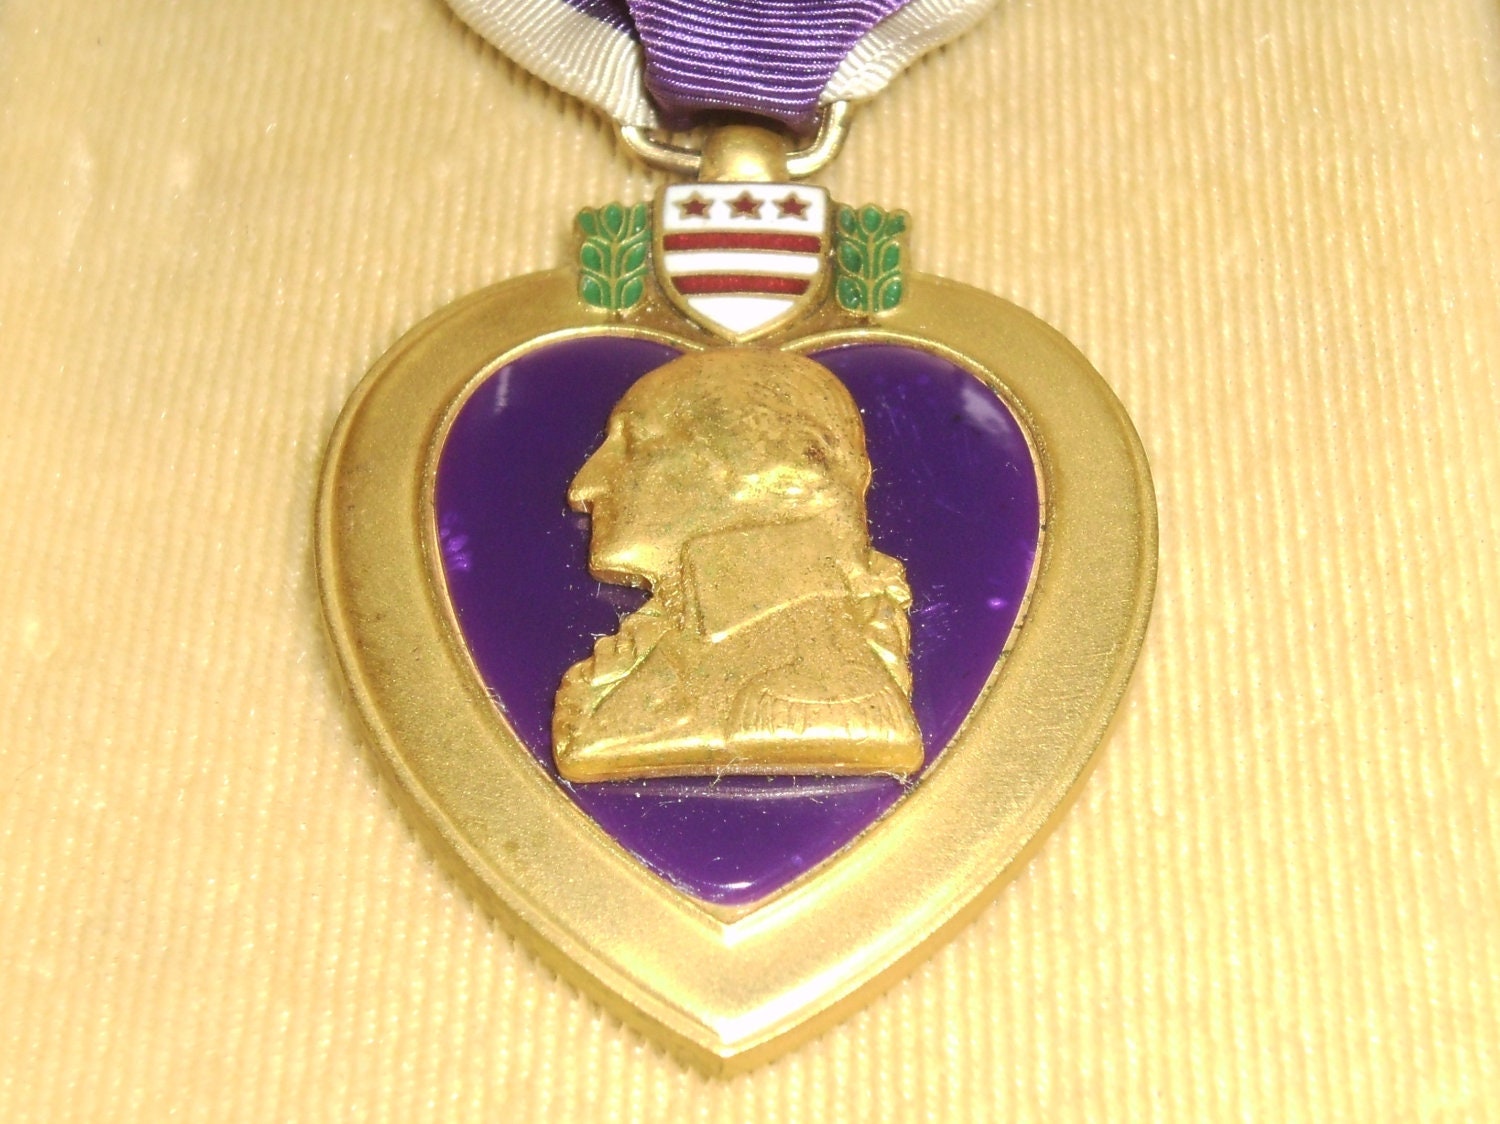 Authentic Wwii Ww2 Purple Heart Medal With Presentation Case